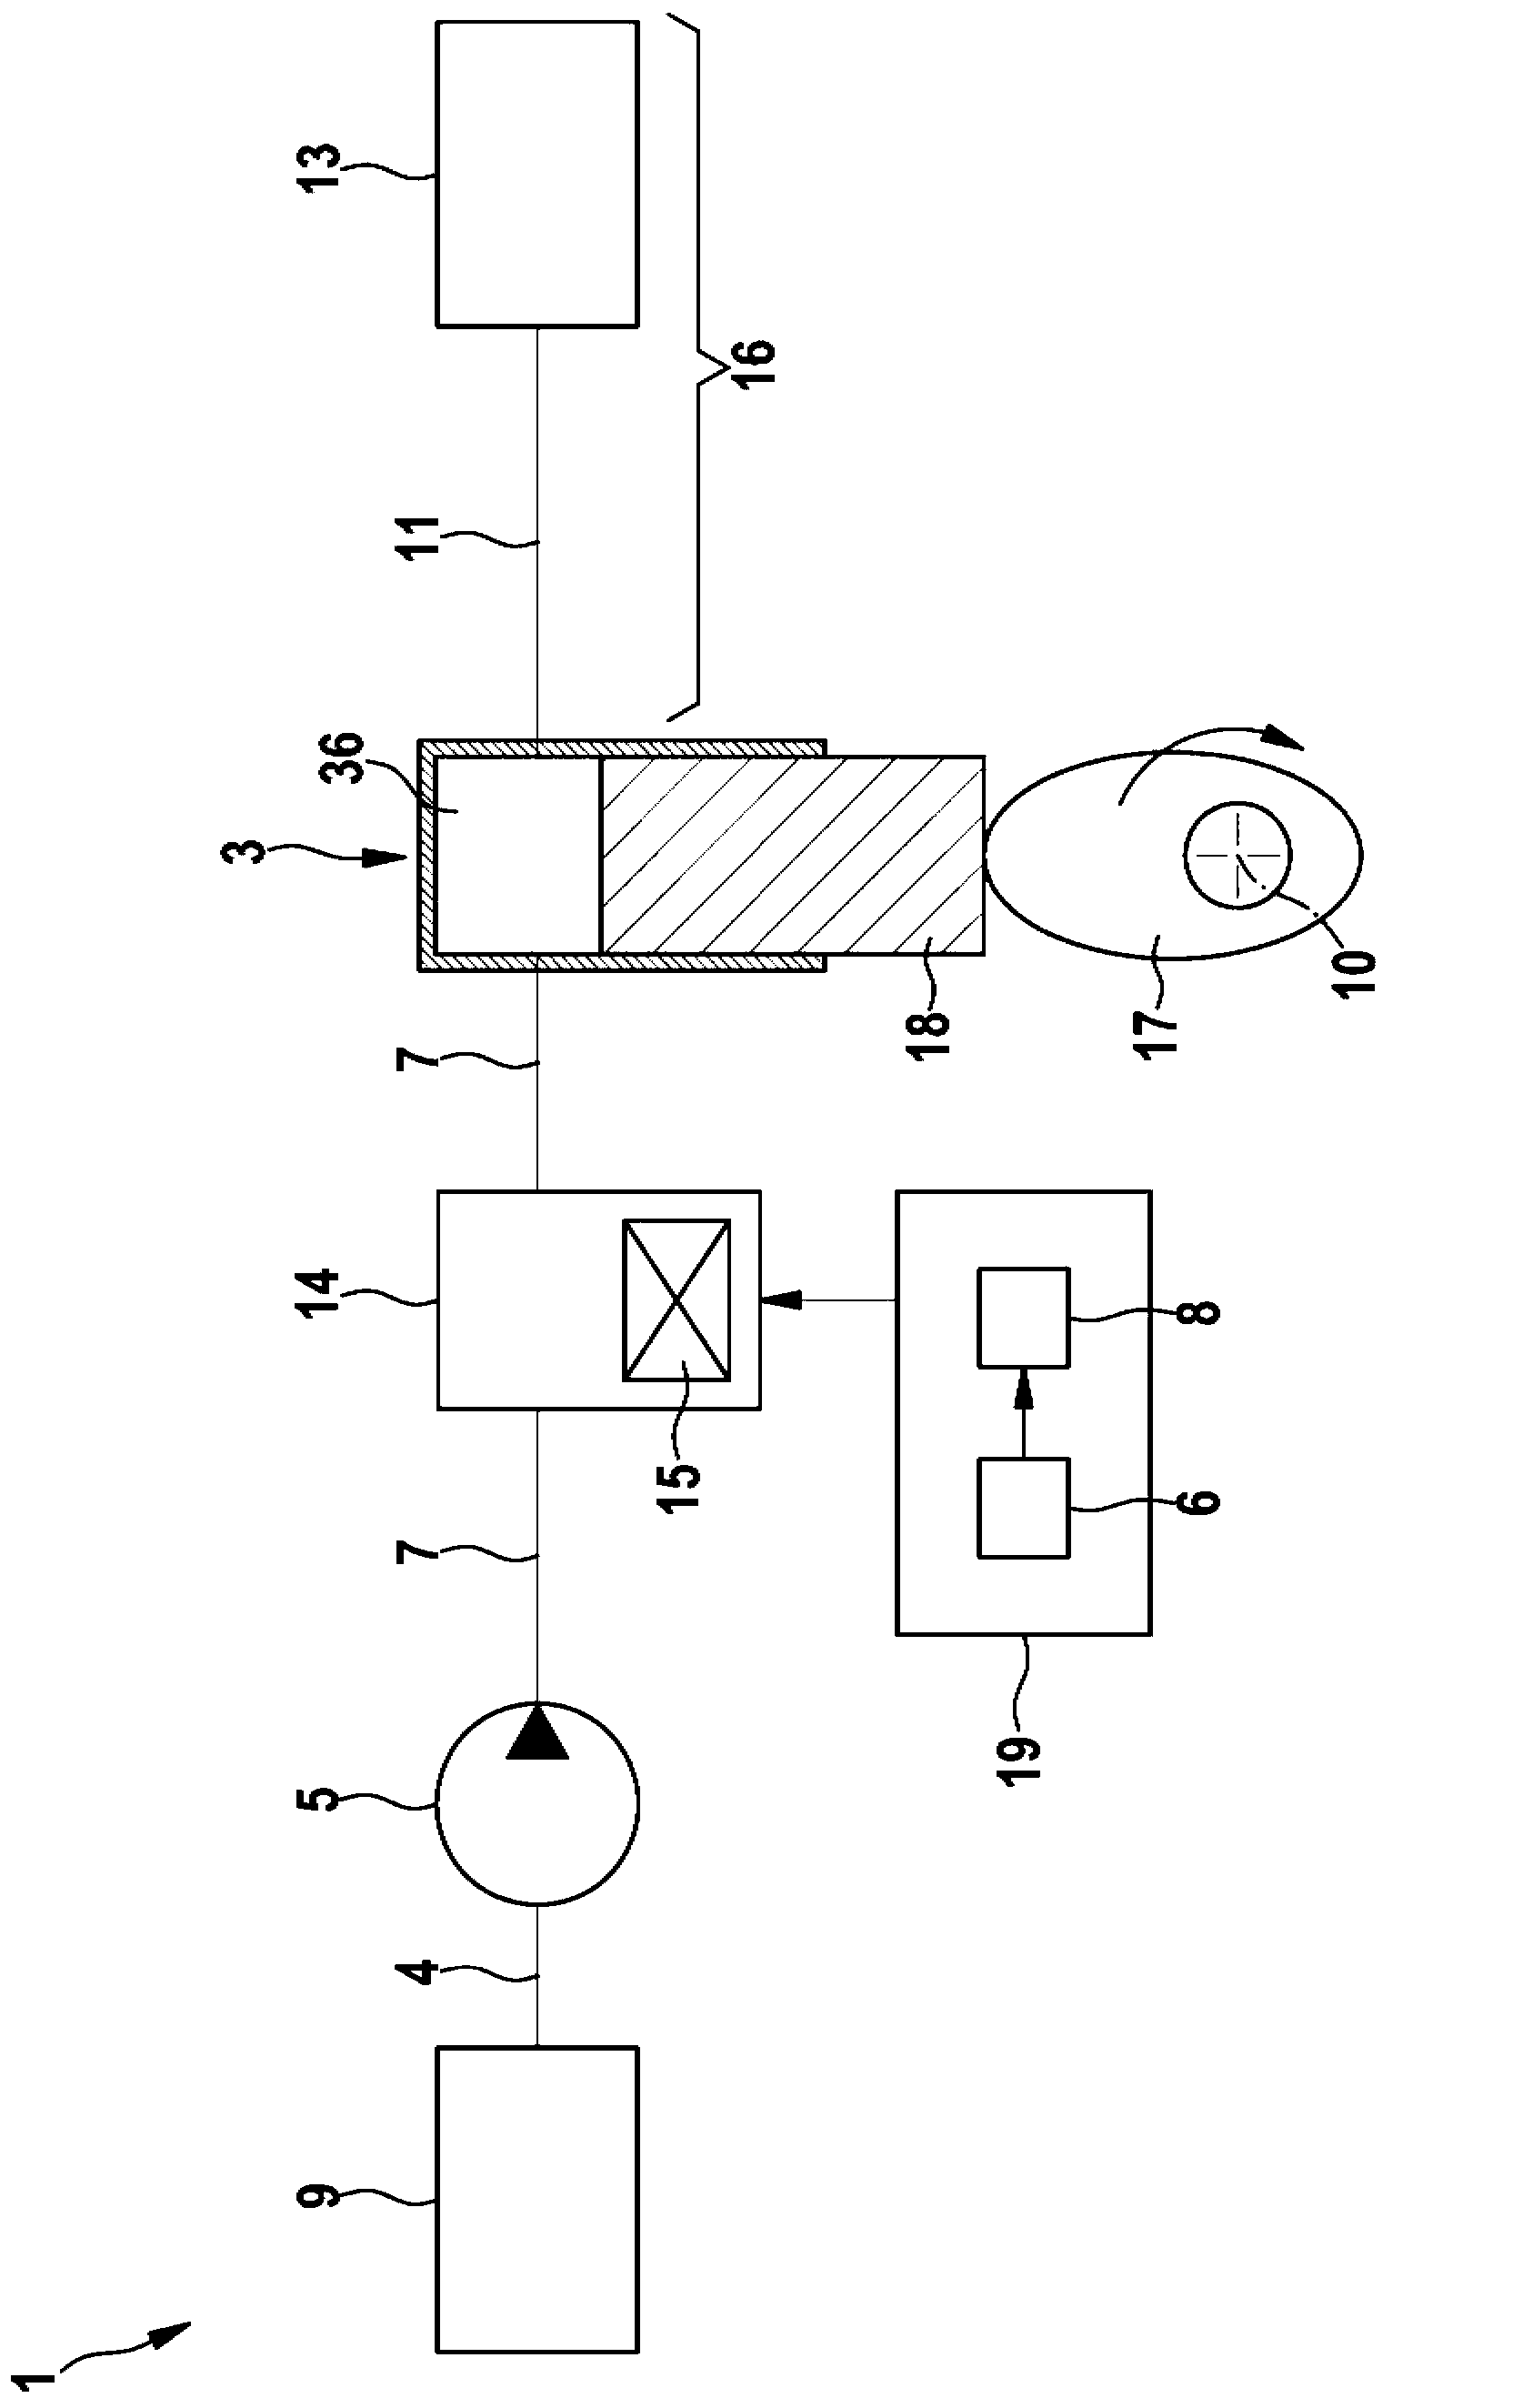 Method for operating a fuel system of an internal combustion engine